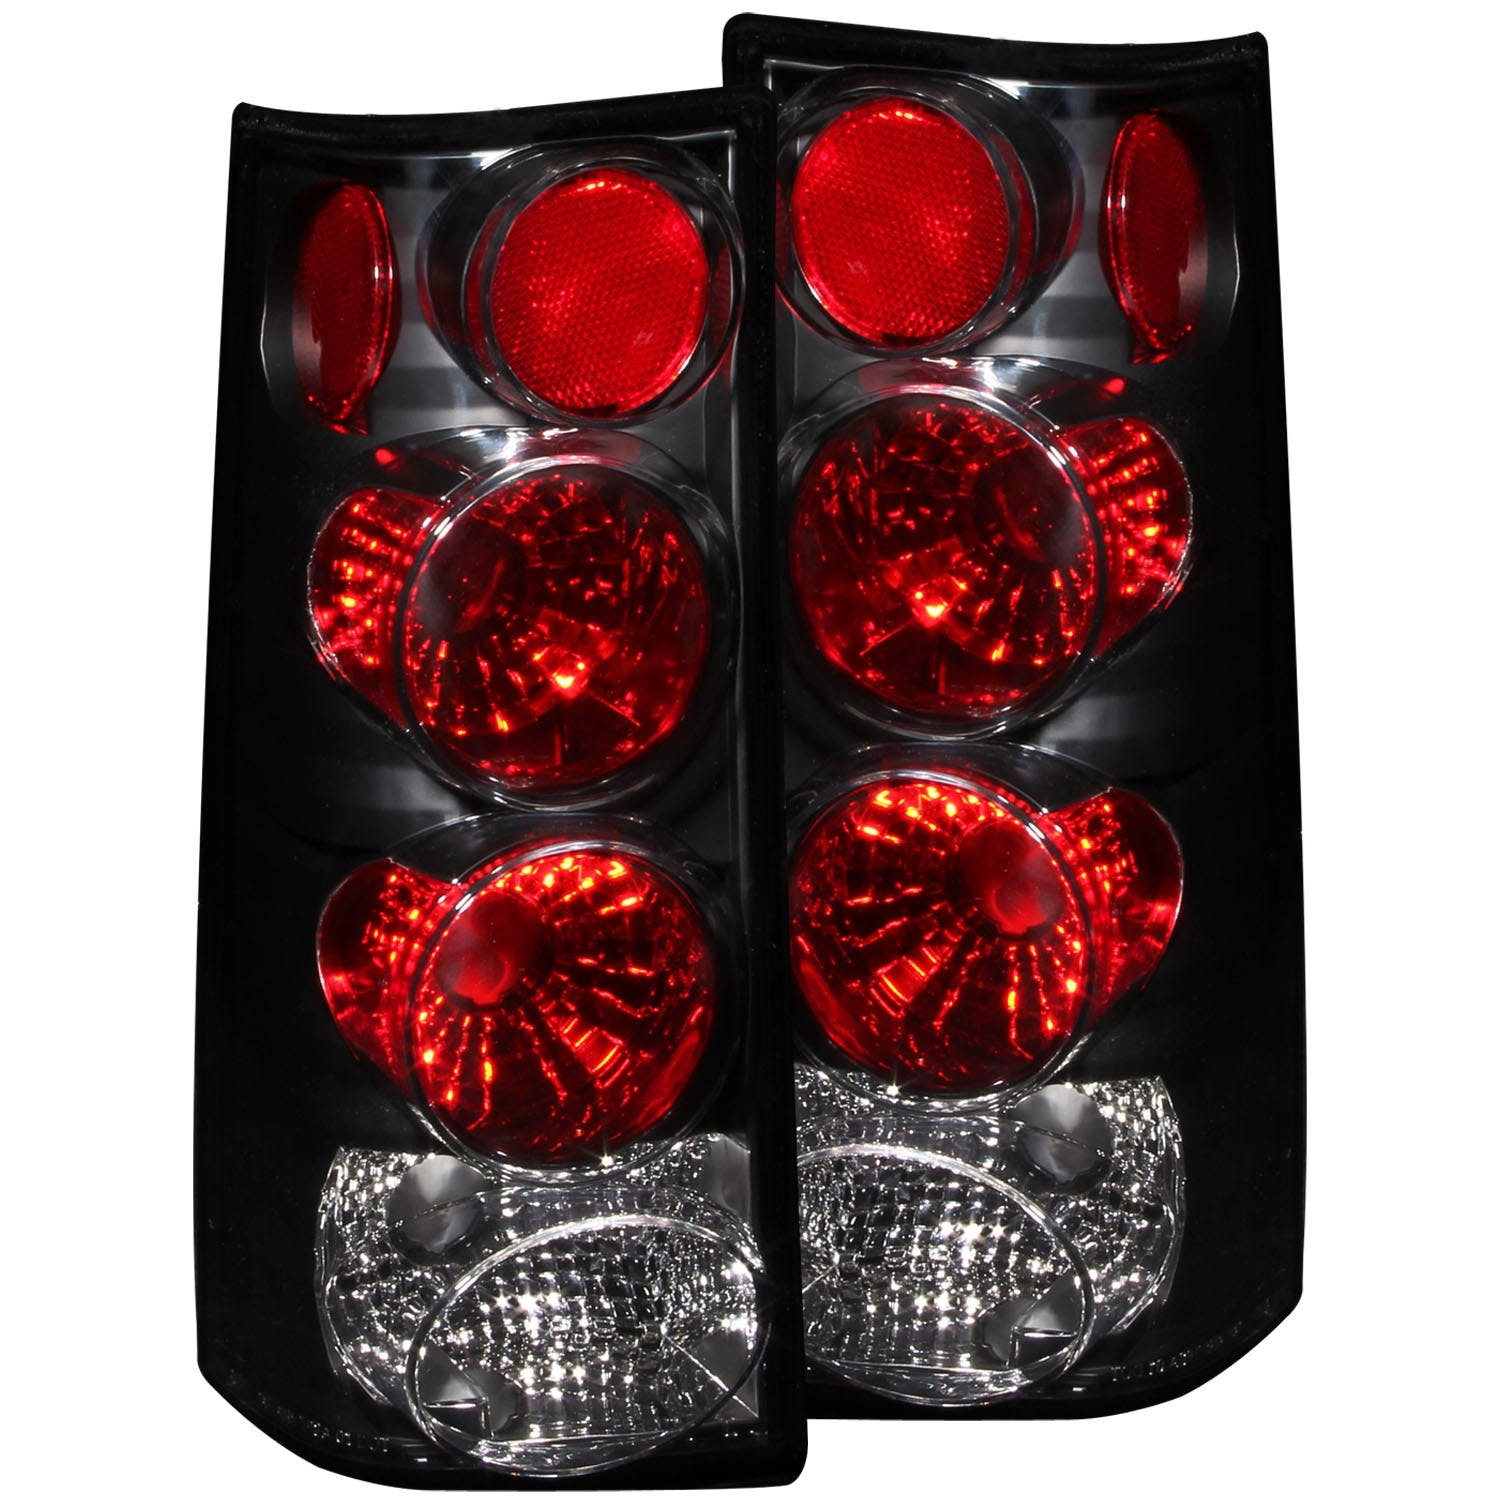 AnzoUSA 211148 Taillights Black